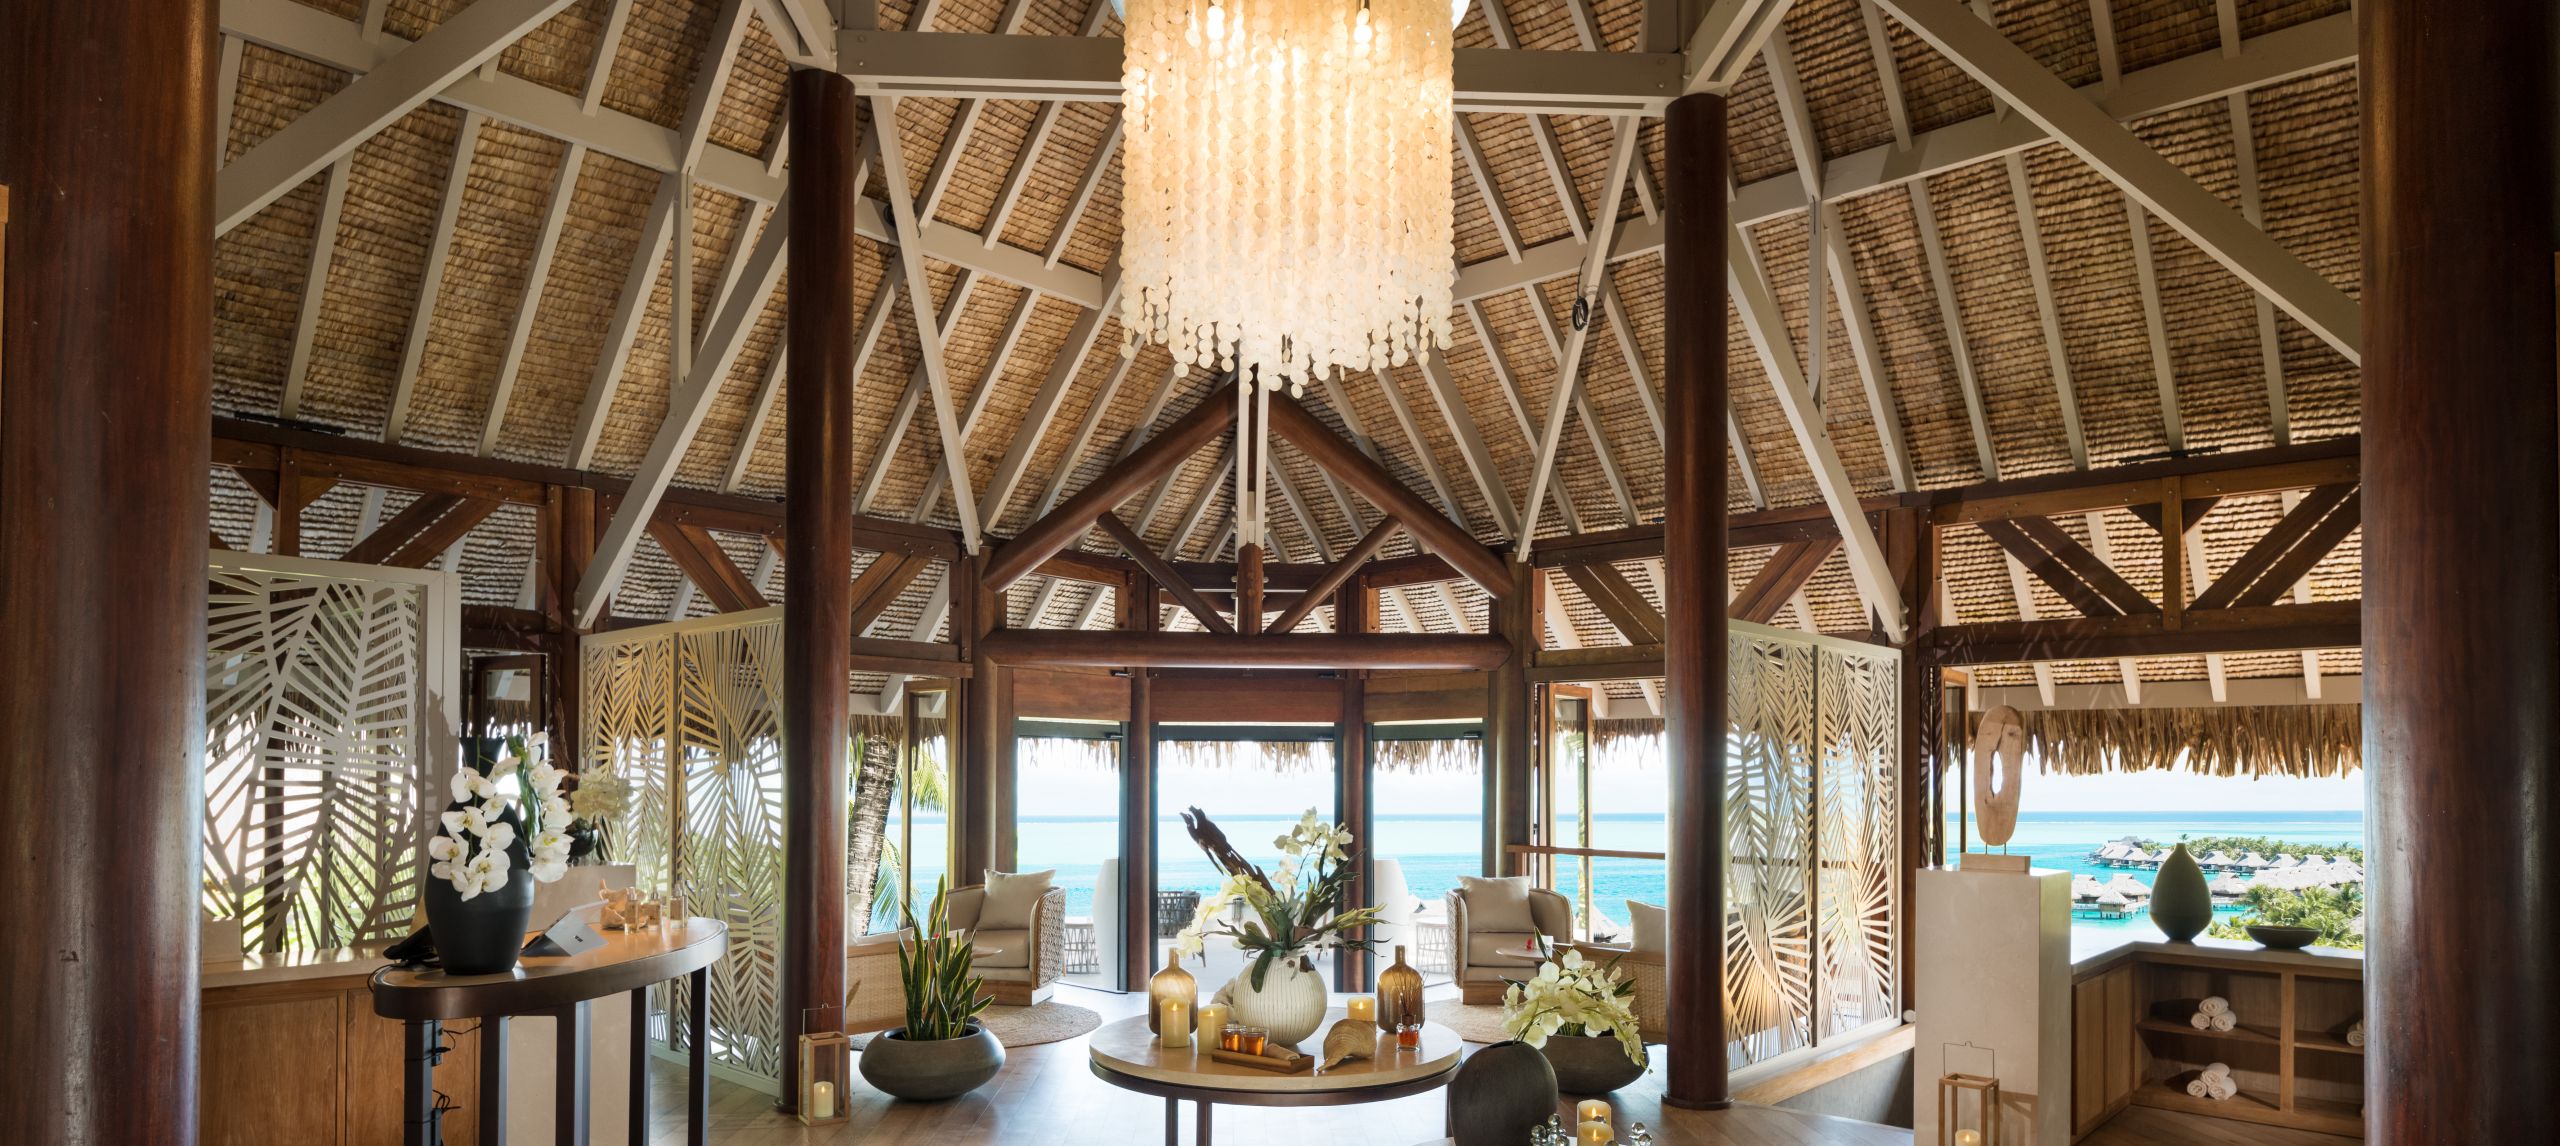 Spa reception area with view of ocean